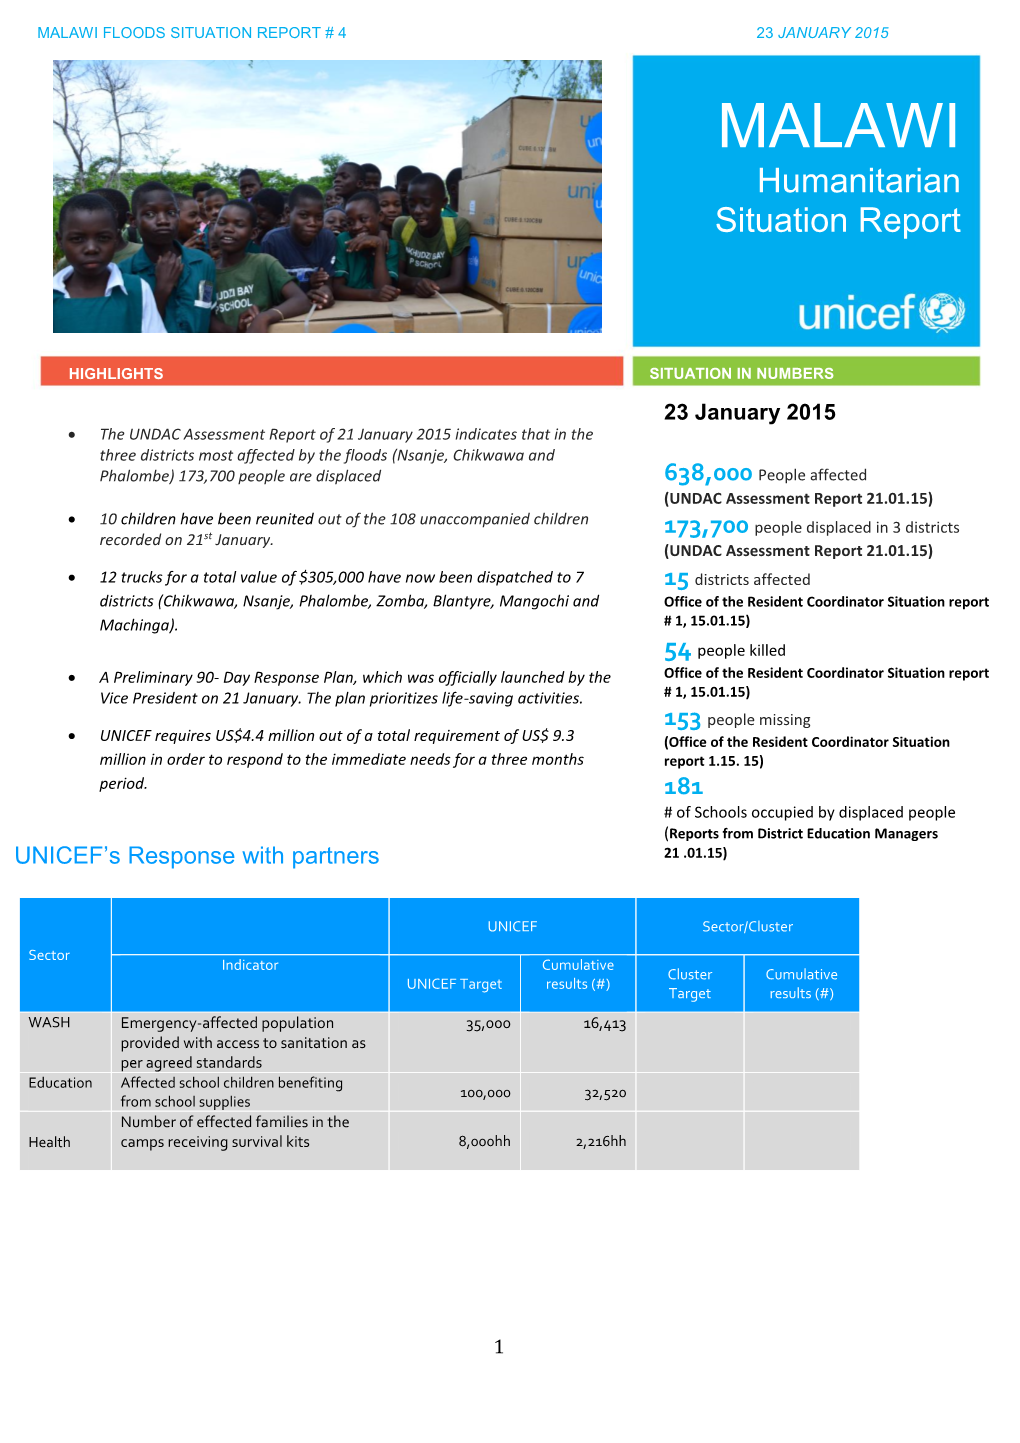 Malawi Floods Situation Report # 4 23 January 2015